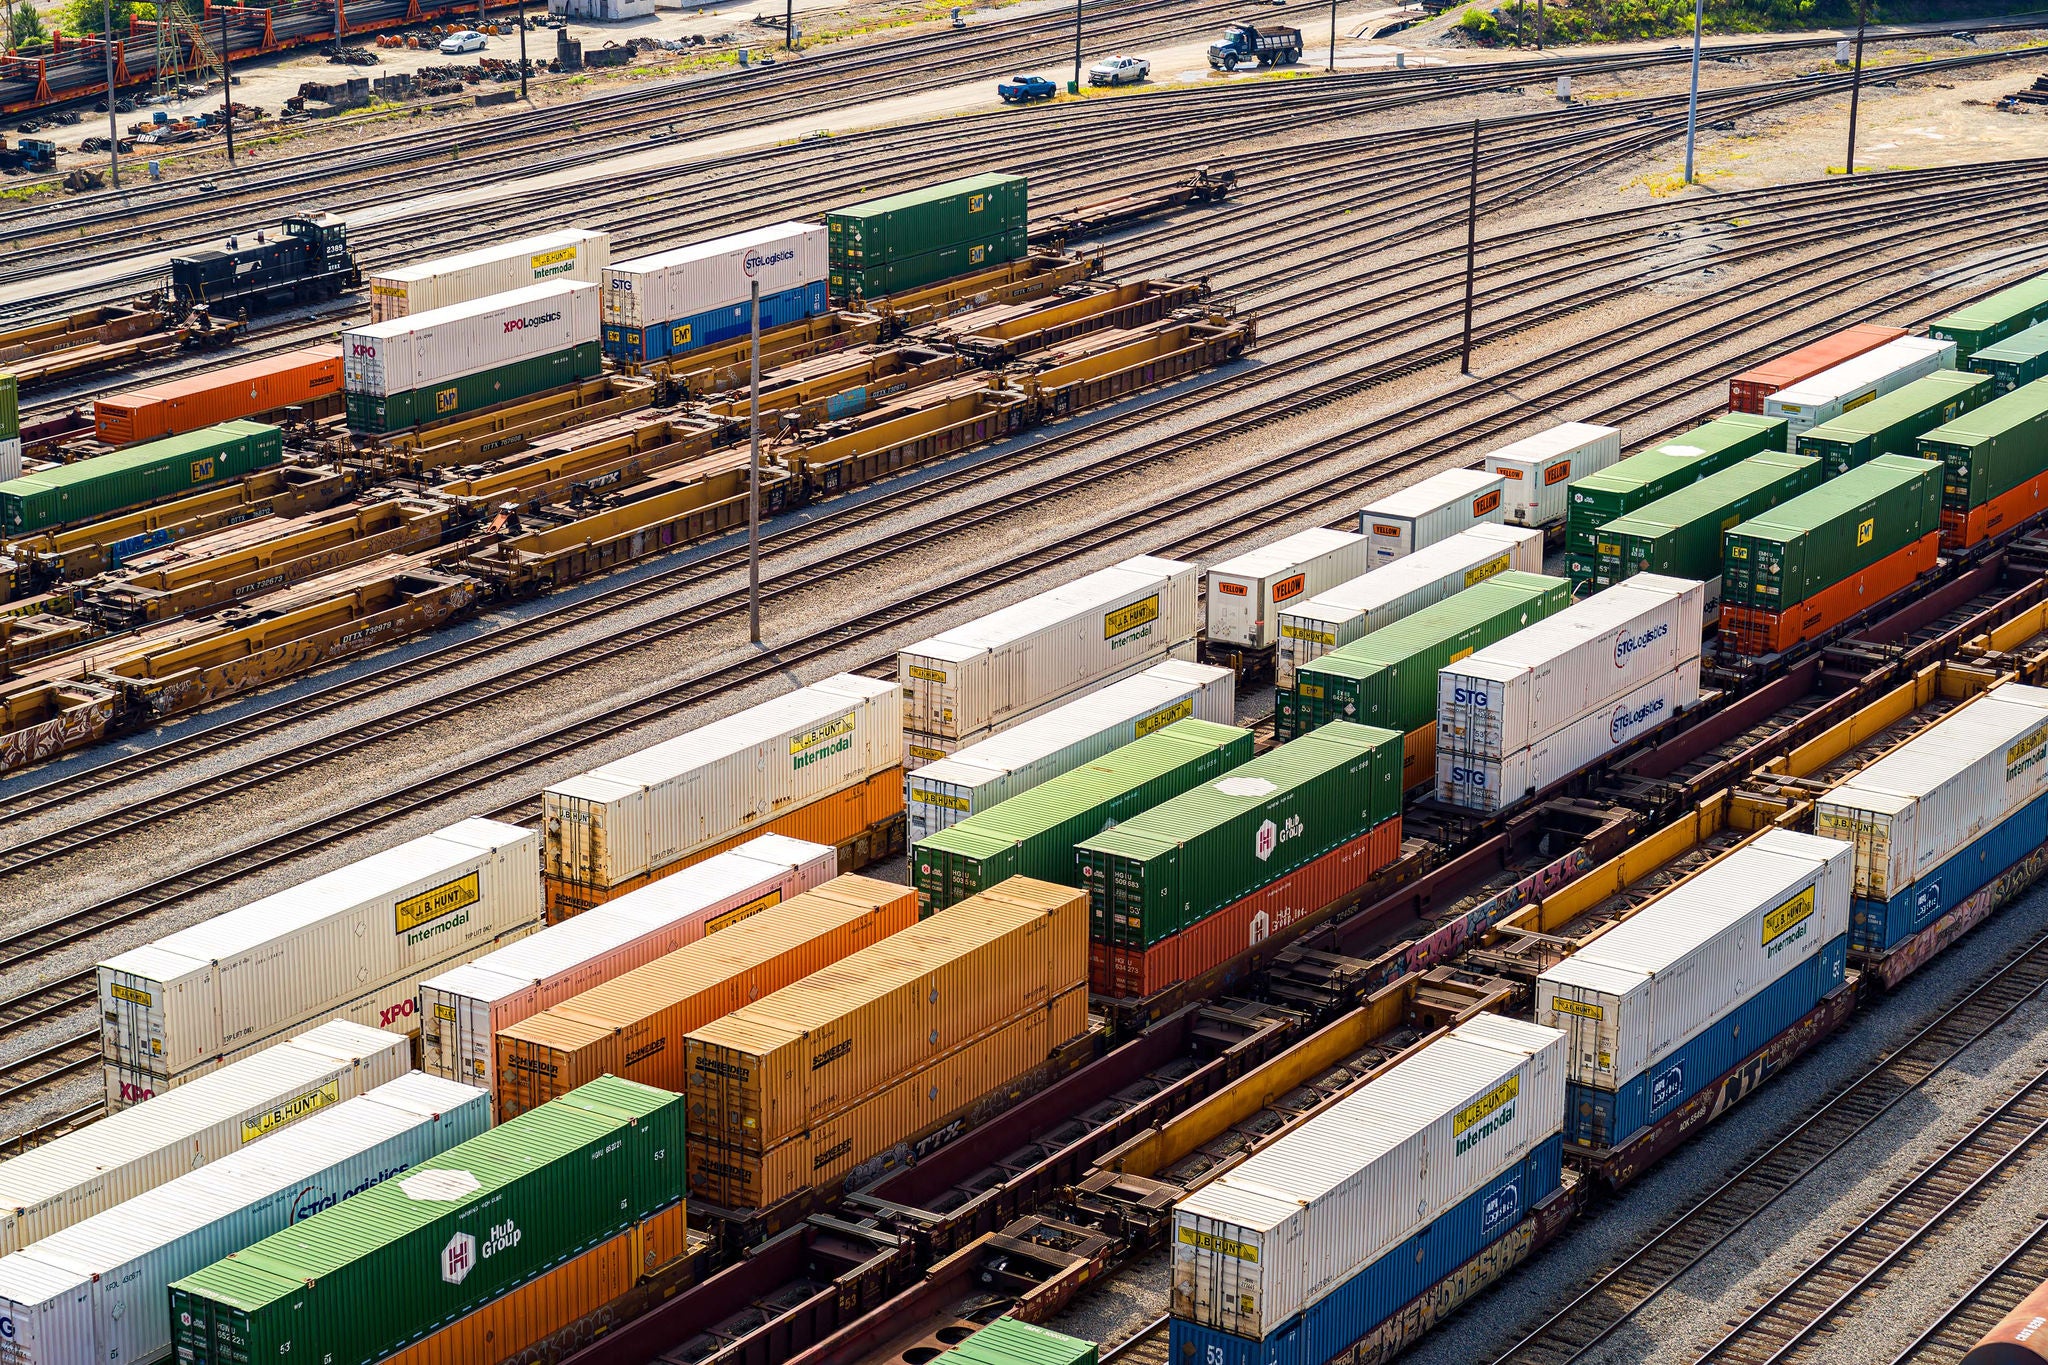 An aerial shot of dozens of intermodal shipping containers parked on Norfolk Southern’s rail lines.